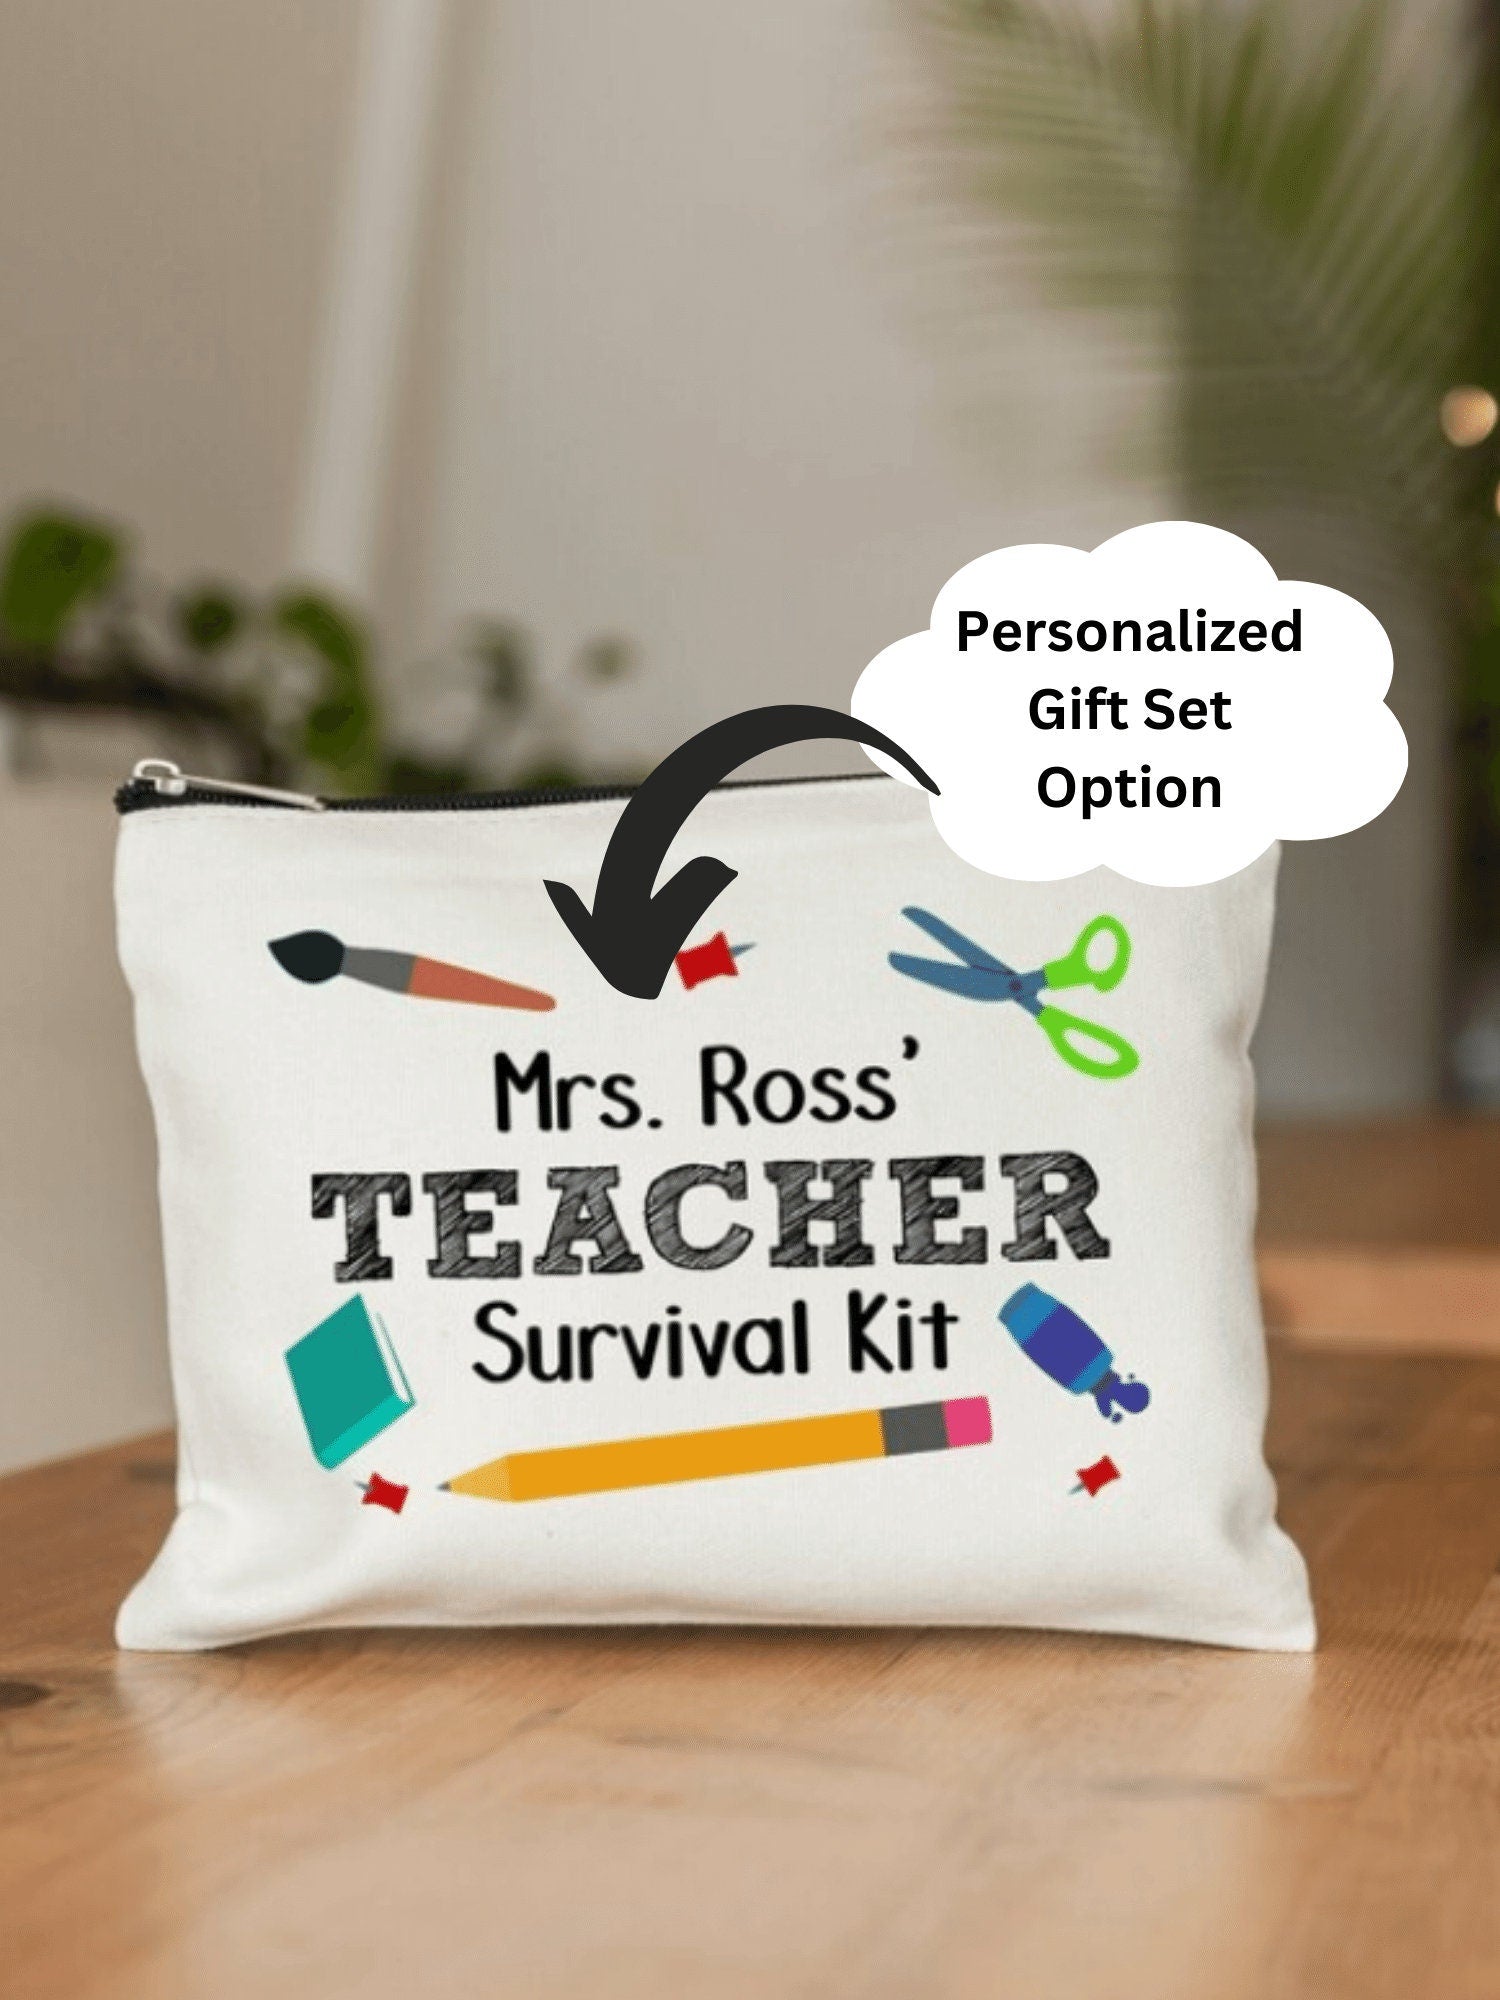 5 Affordable and Easy Gift Ideas for Teachers' Day